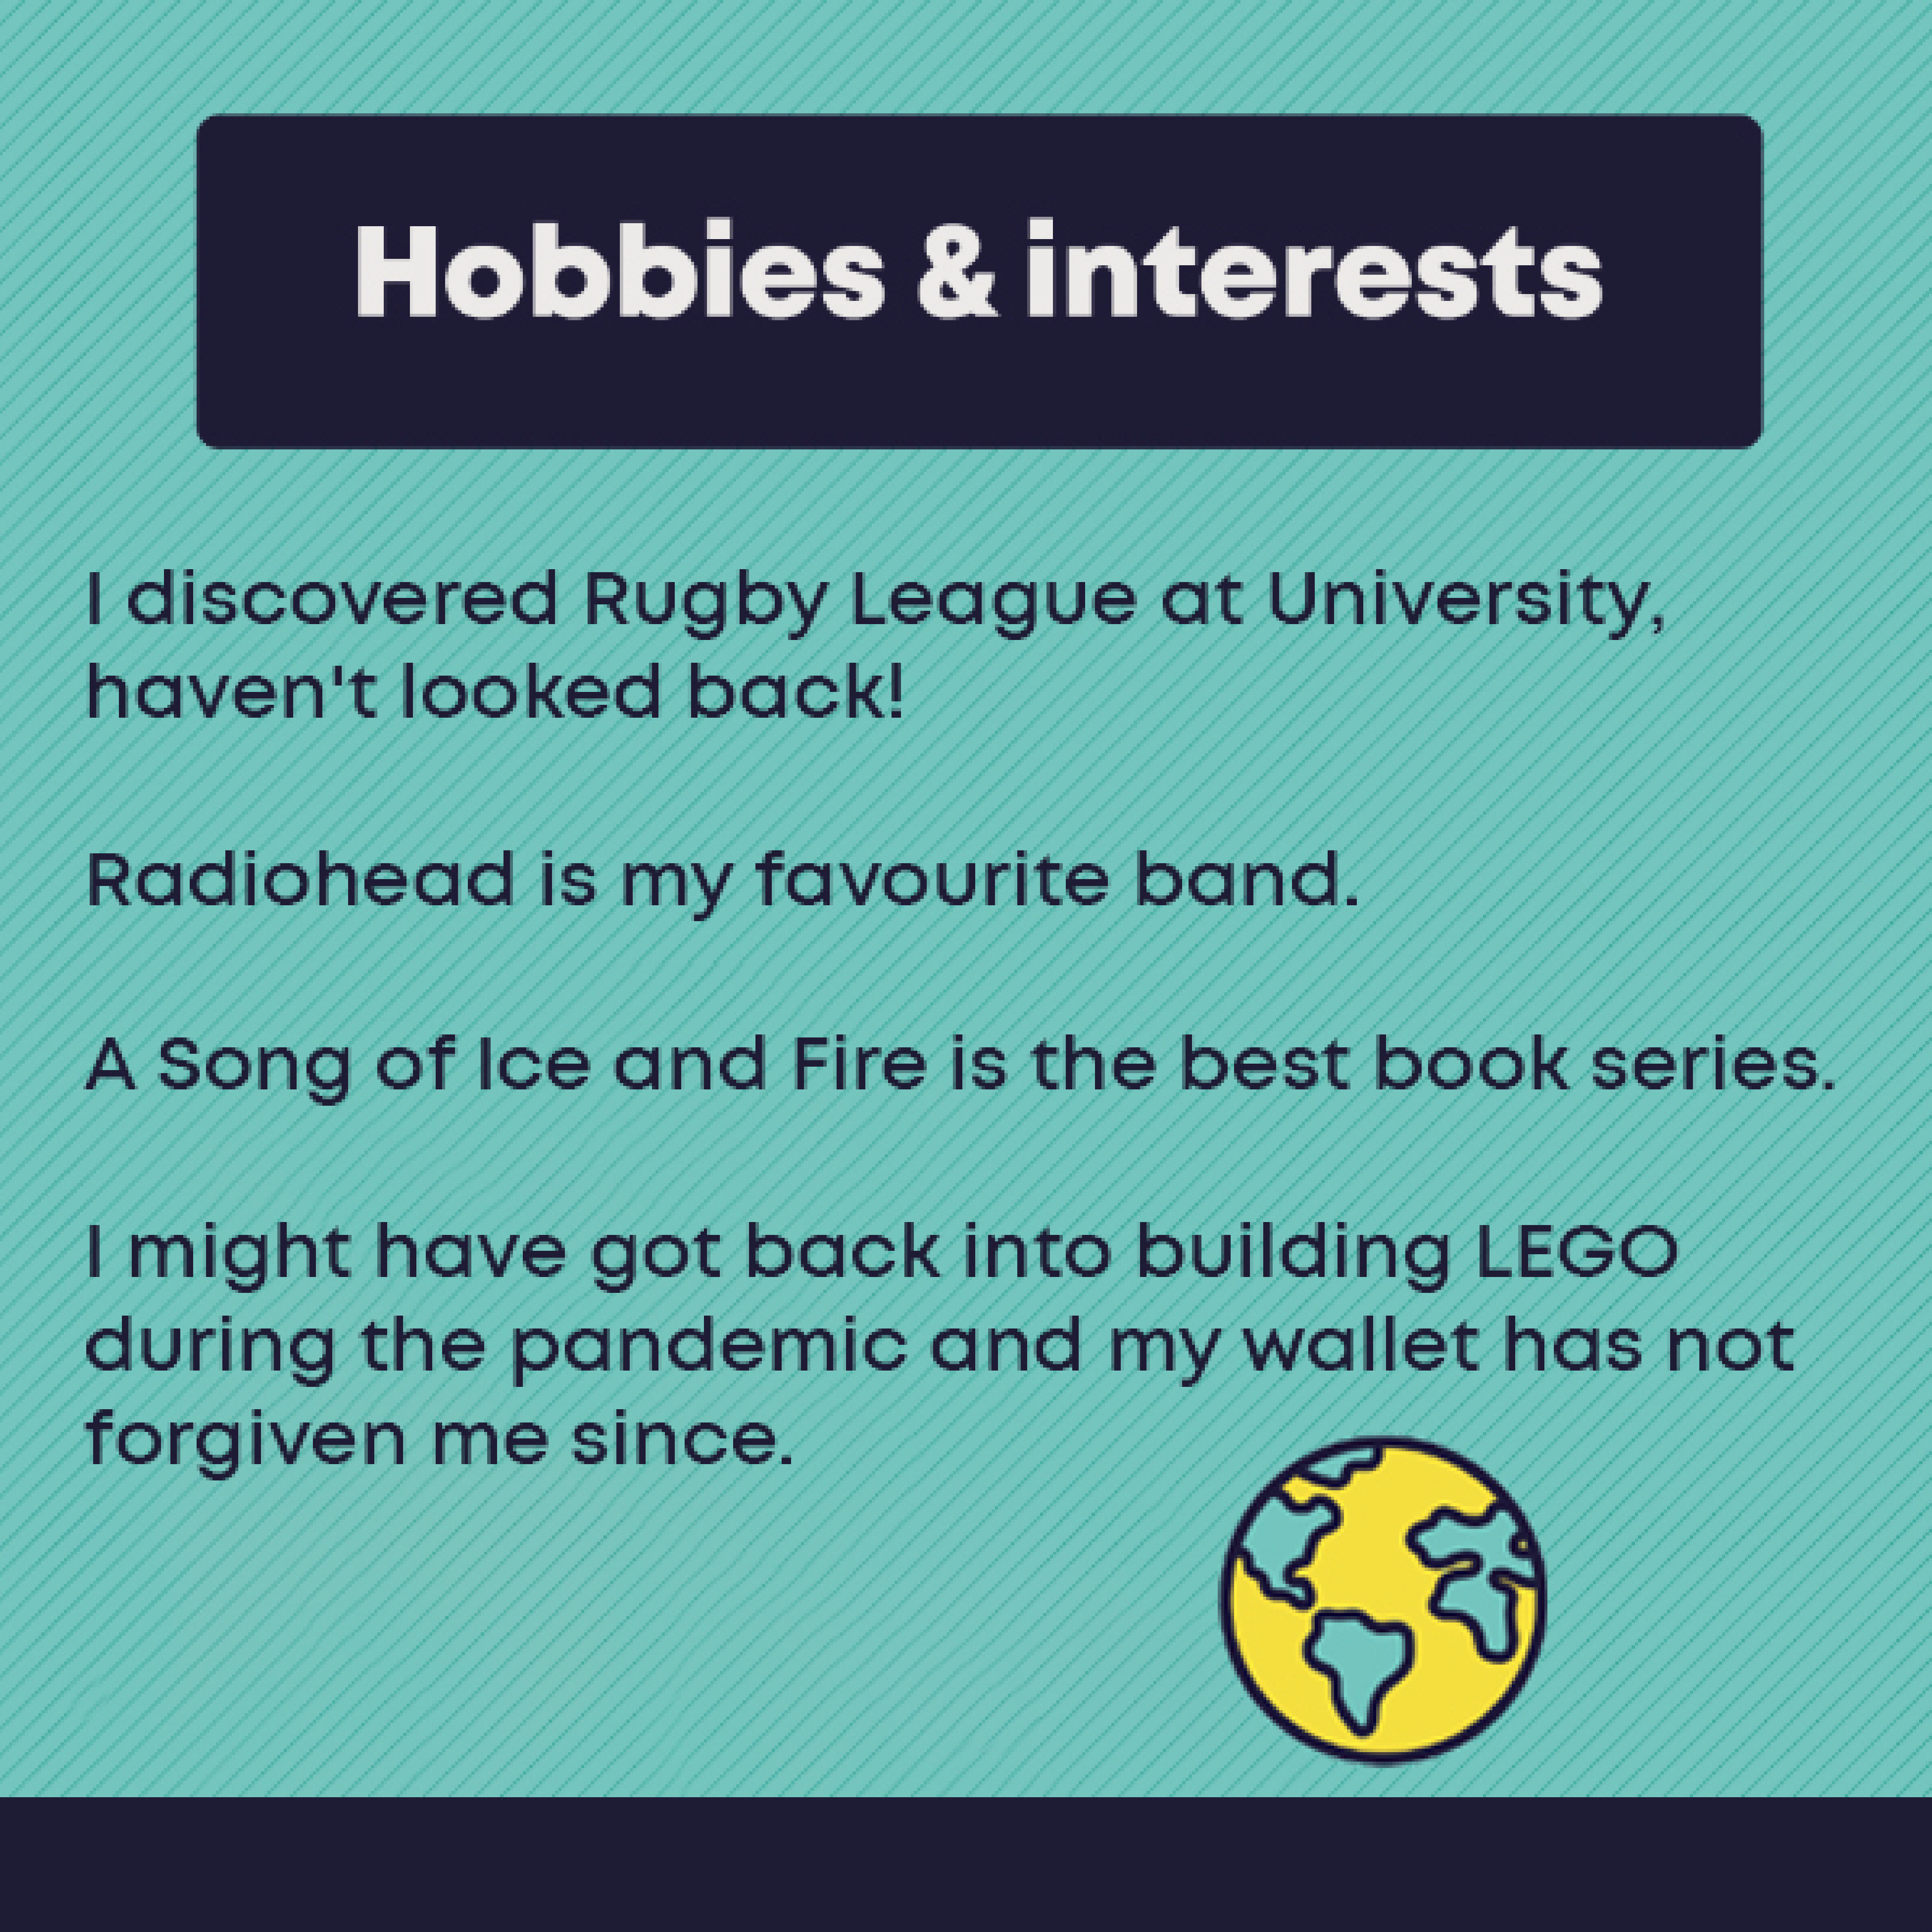 Hobbies and Interests: I discovered Rugby League at University, haven't looked back!    Radiohead is my favourite band.      A Song of Ice and Fire is the best book series.    I might have got back into building LEGO during the pandemic and my wallet has not forgiven me since.